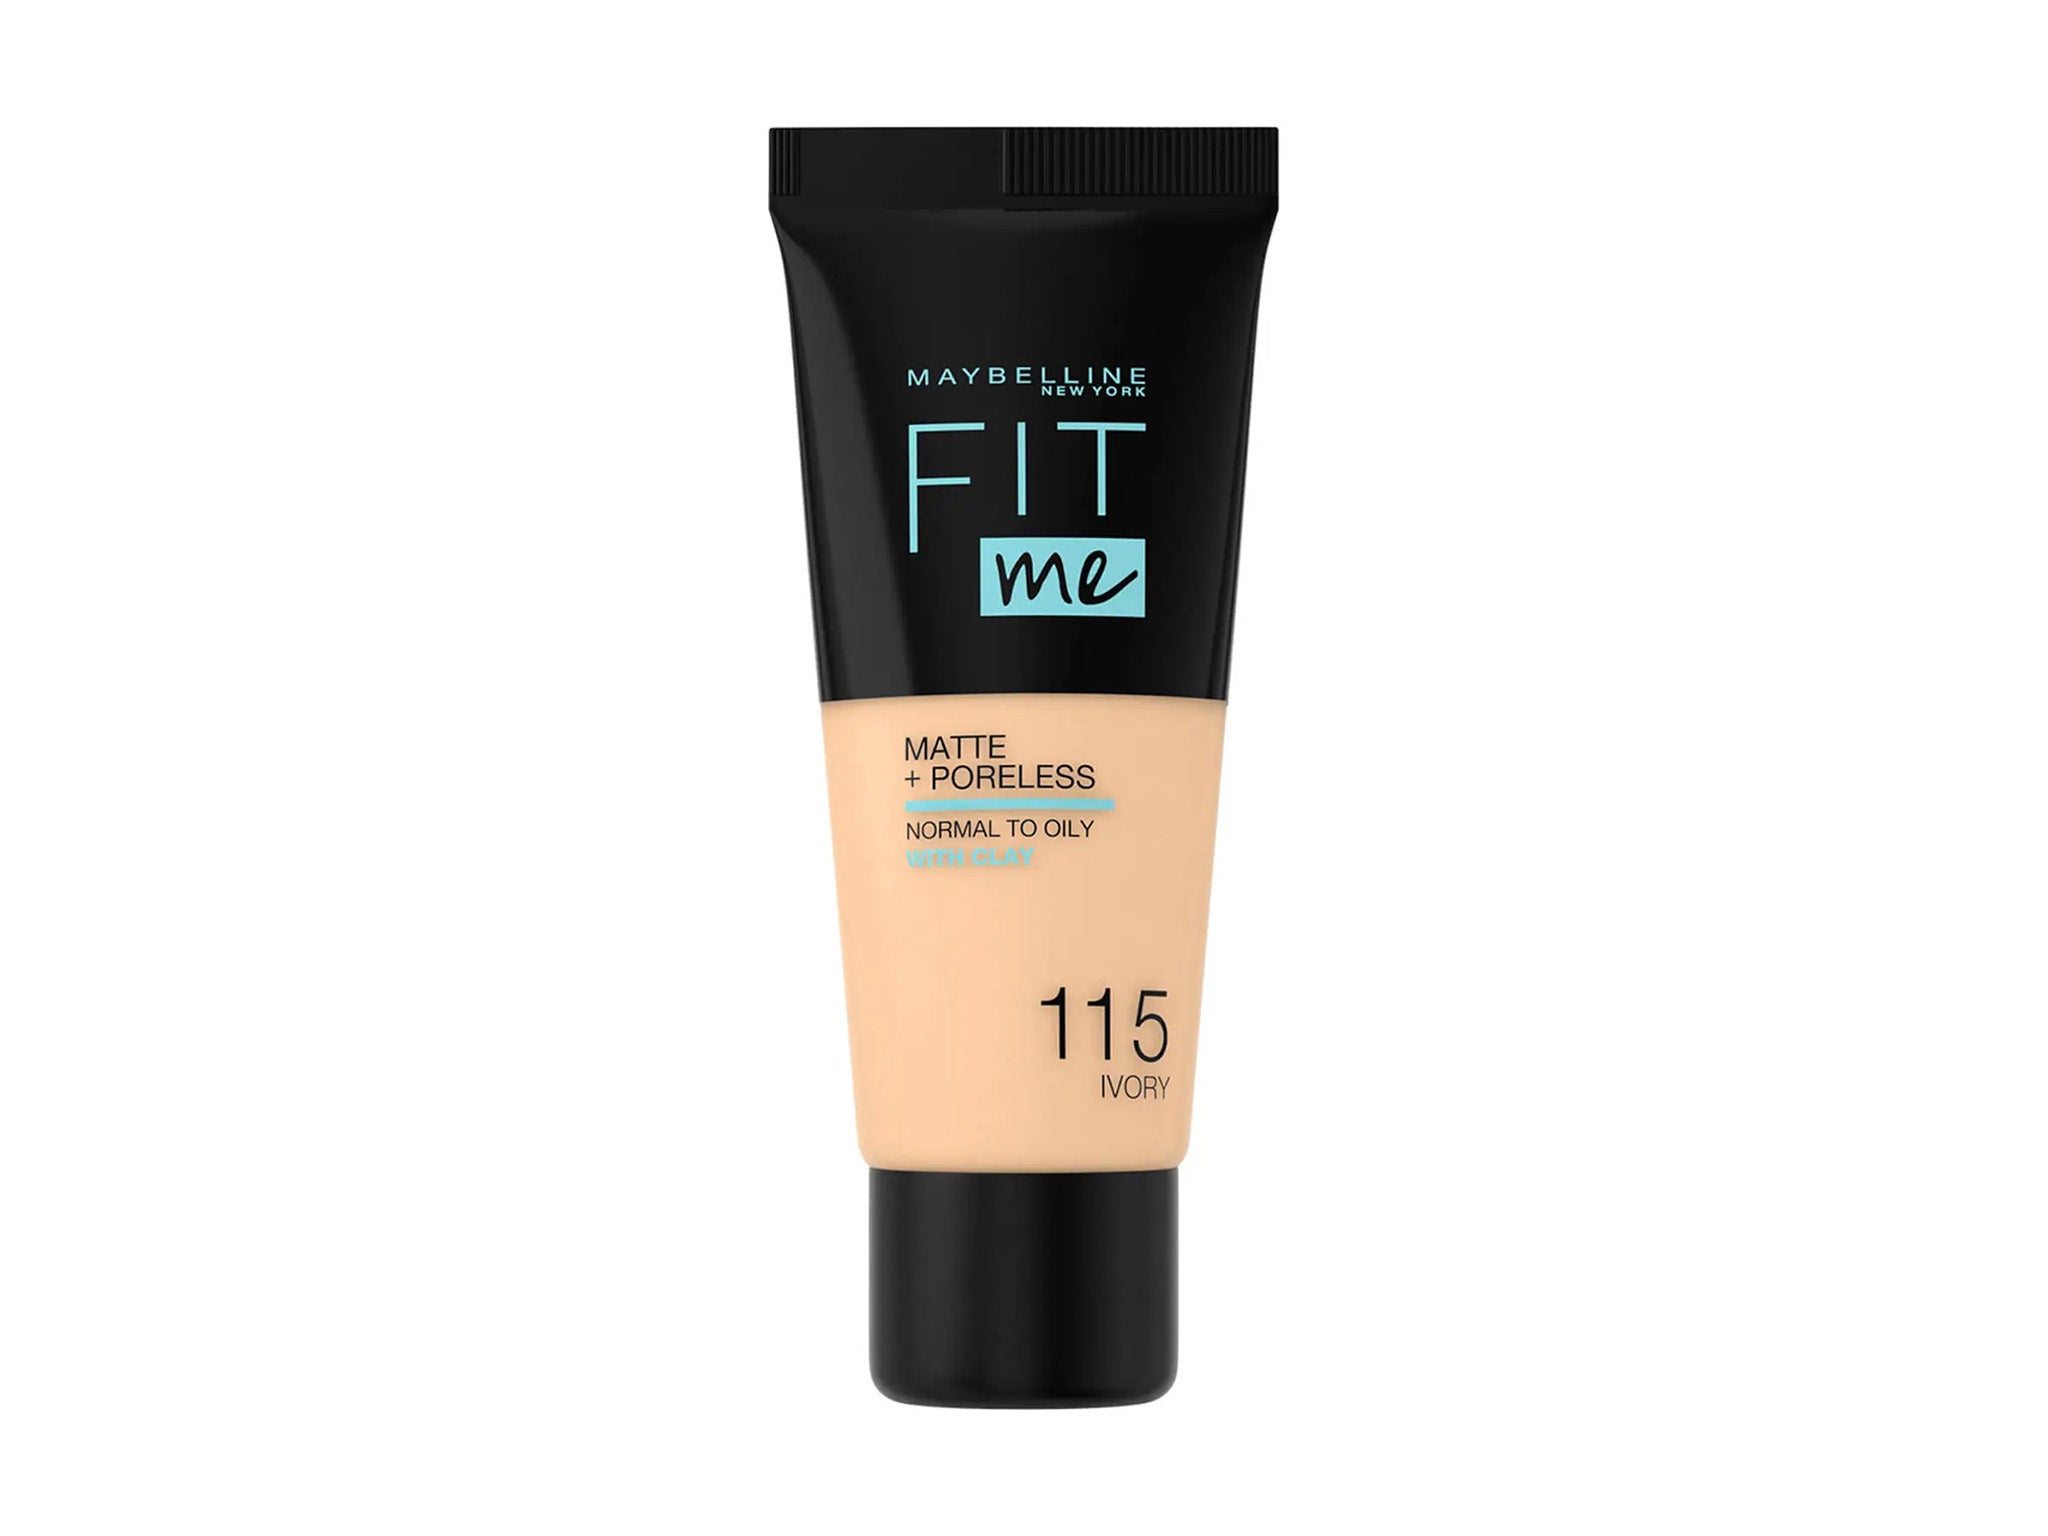 Maybelline fit me matte and poreless